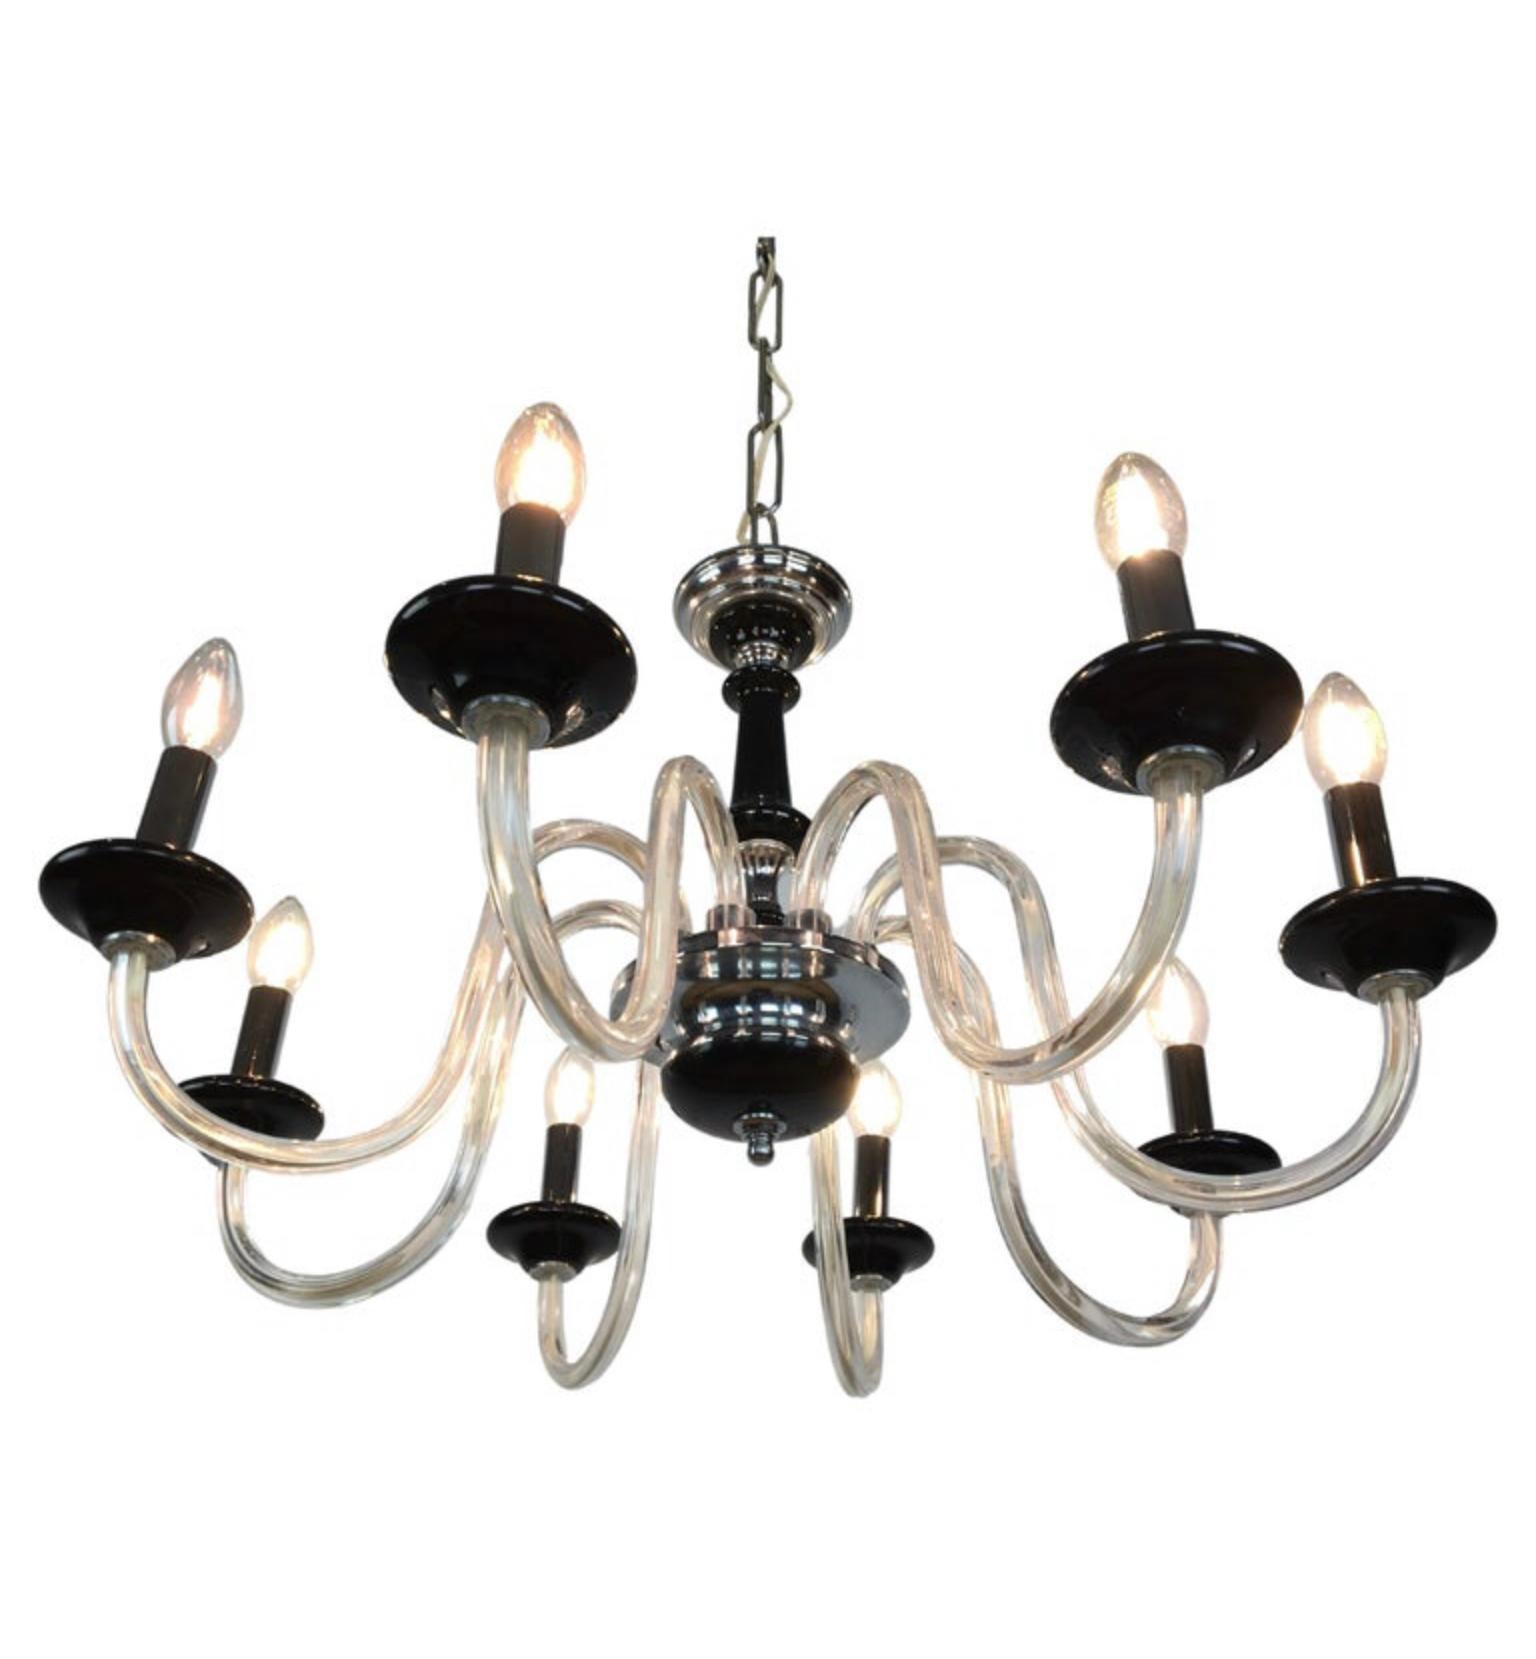 8-armed Murano glass chandeliers in different colors: 
Black - orange - green and blue turquoise. 
Mid-20th Century ceiling lights with 8 curling arms.
Vintage Italian chandeliers or ceiling lights with colored murano glass details and chromed